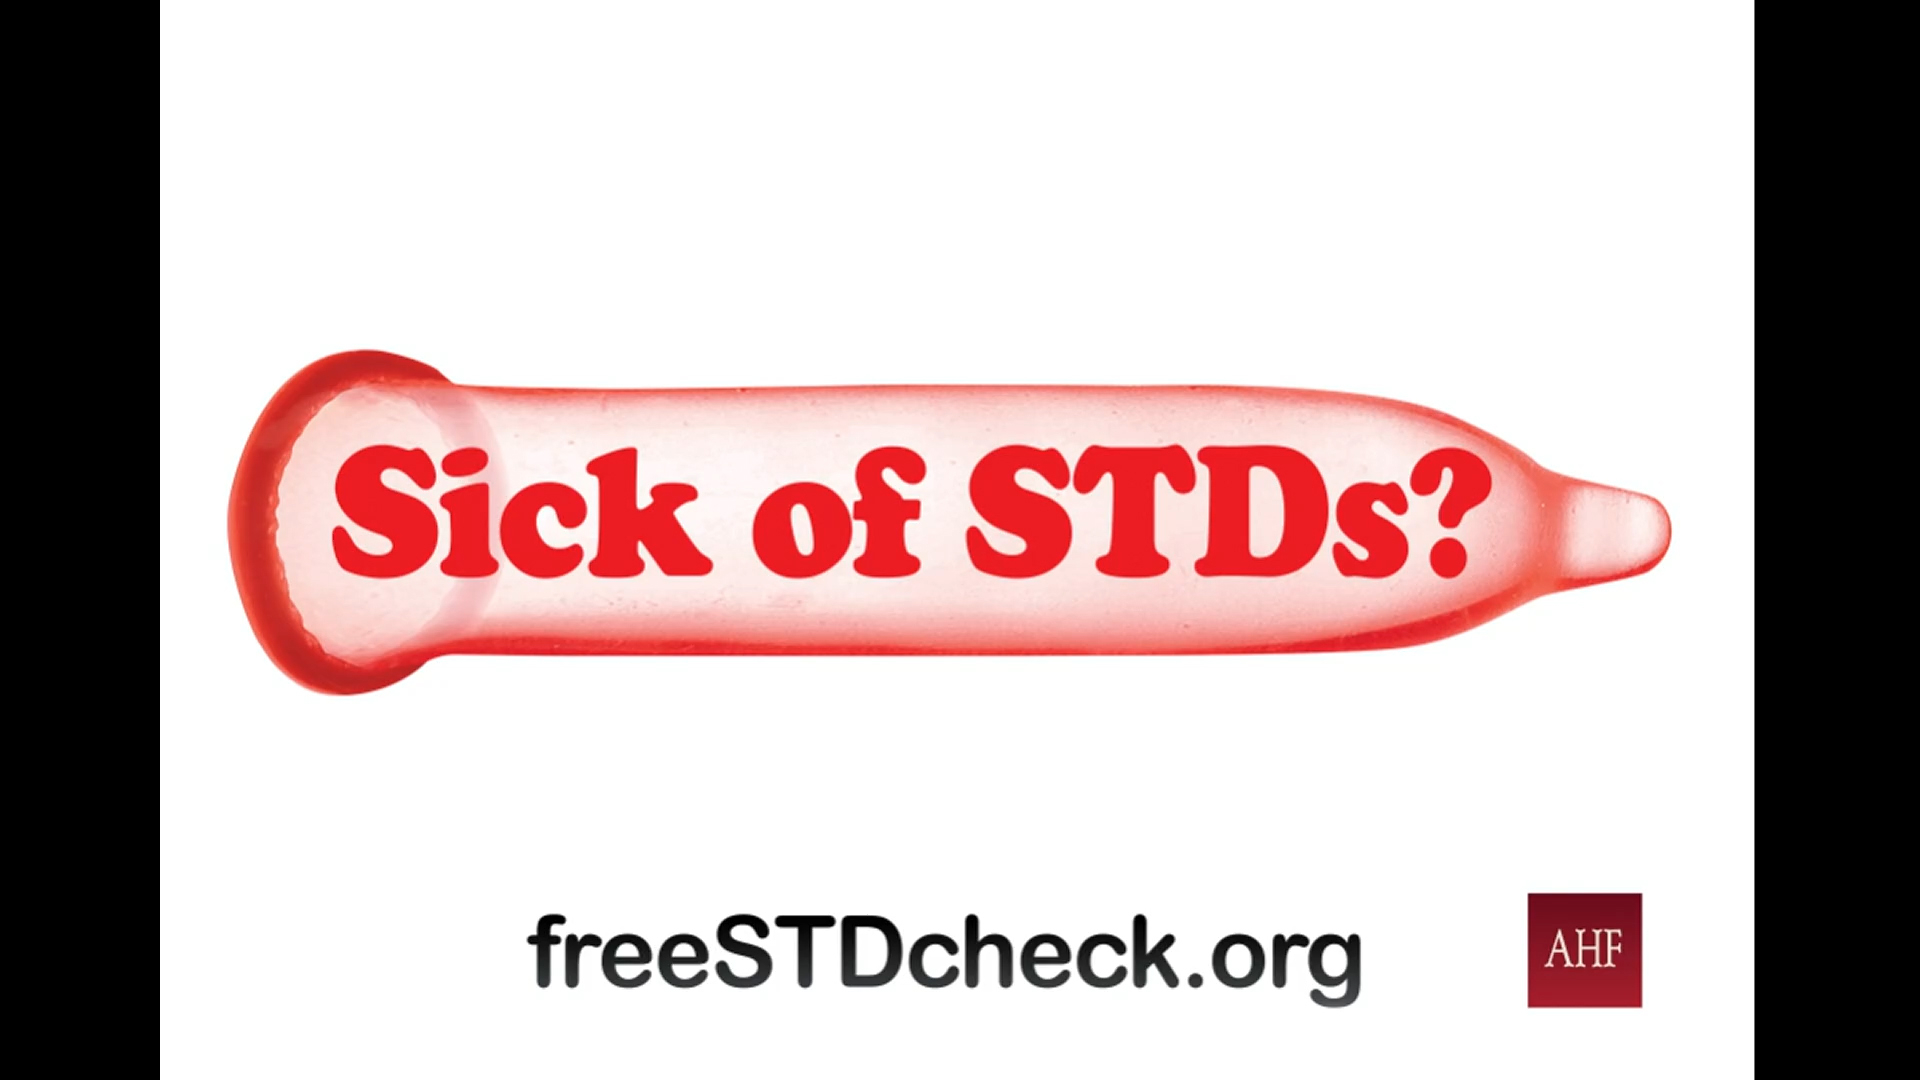 AHF’s “Sick of STDs?” billboard and campaign art features that simple question placed as a headline over the image of an unfurled, horizontal condom and drives viewers to the website: www.freeSTDcheck.org